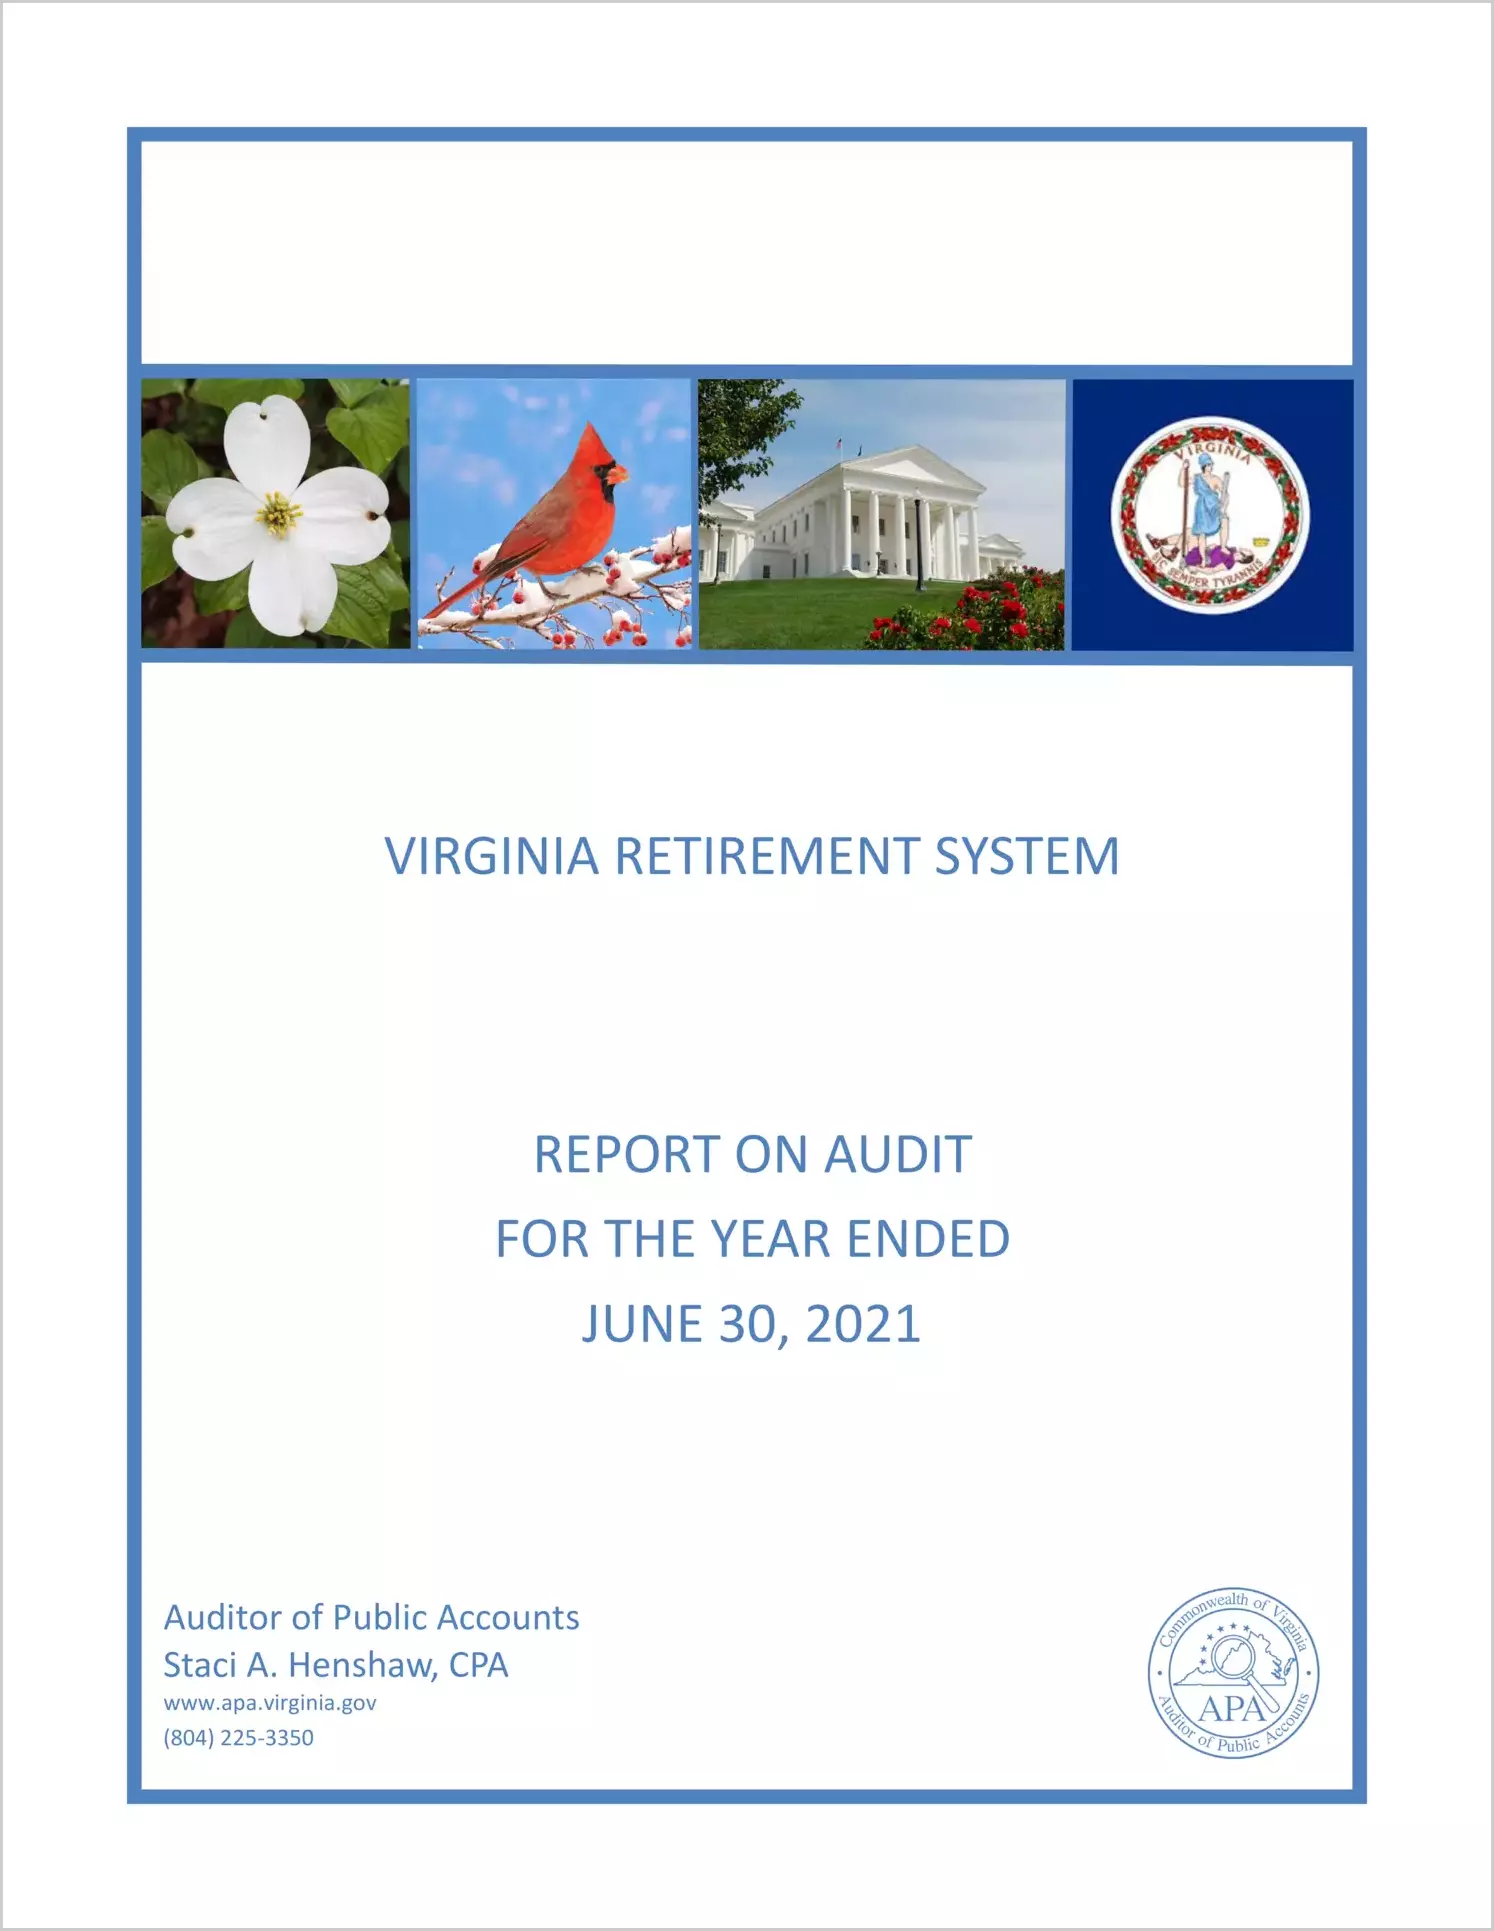 Virginia Retirement System for the year ended June 30, 2021